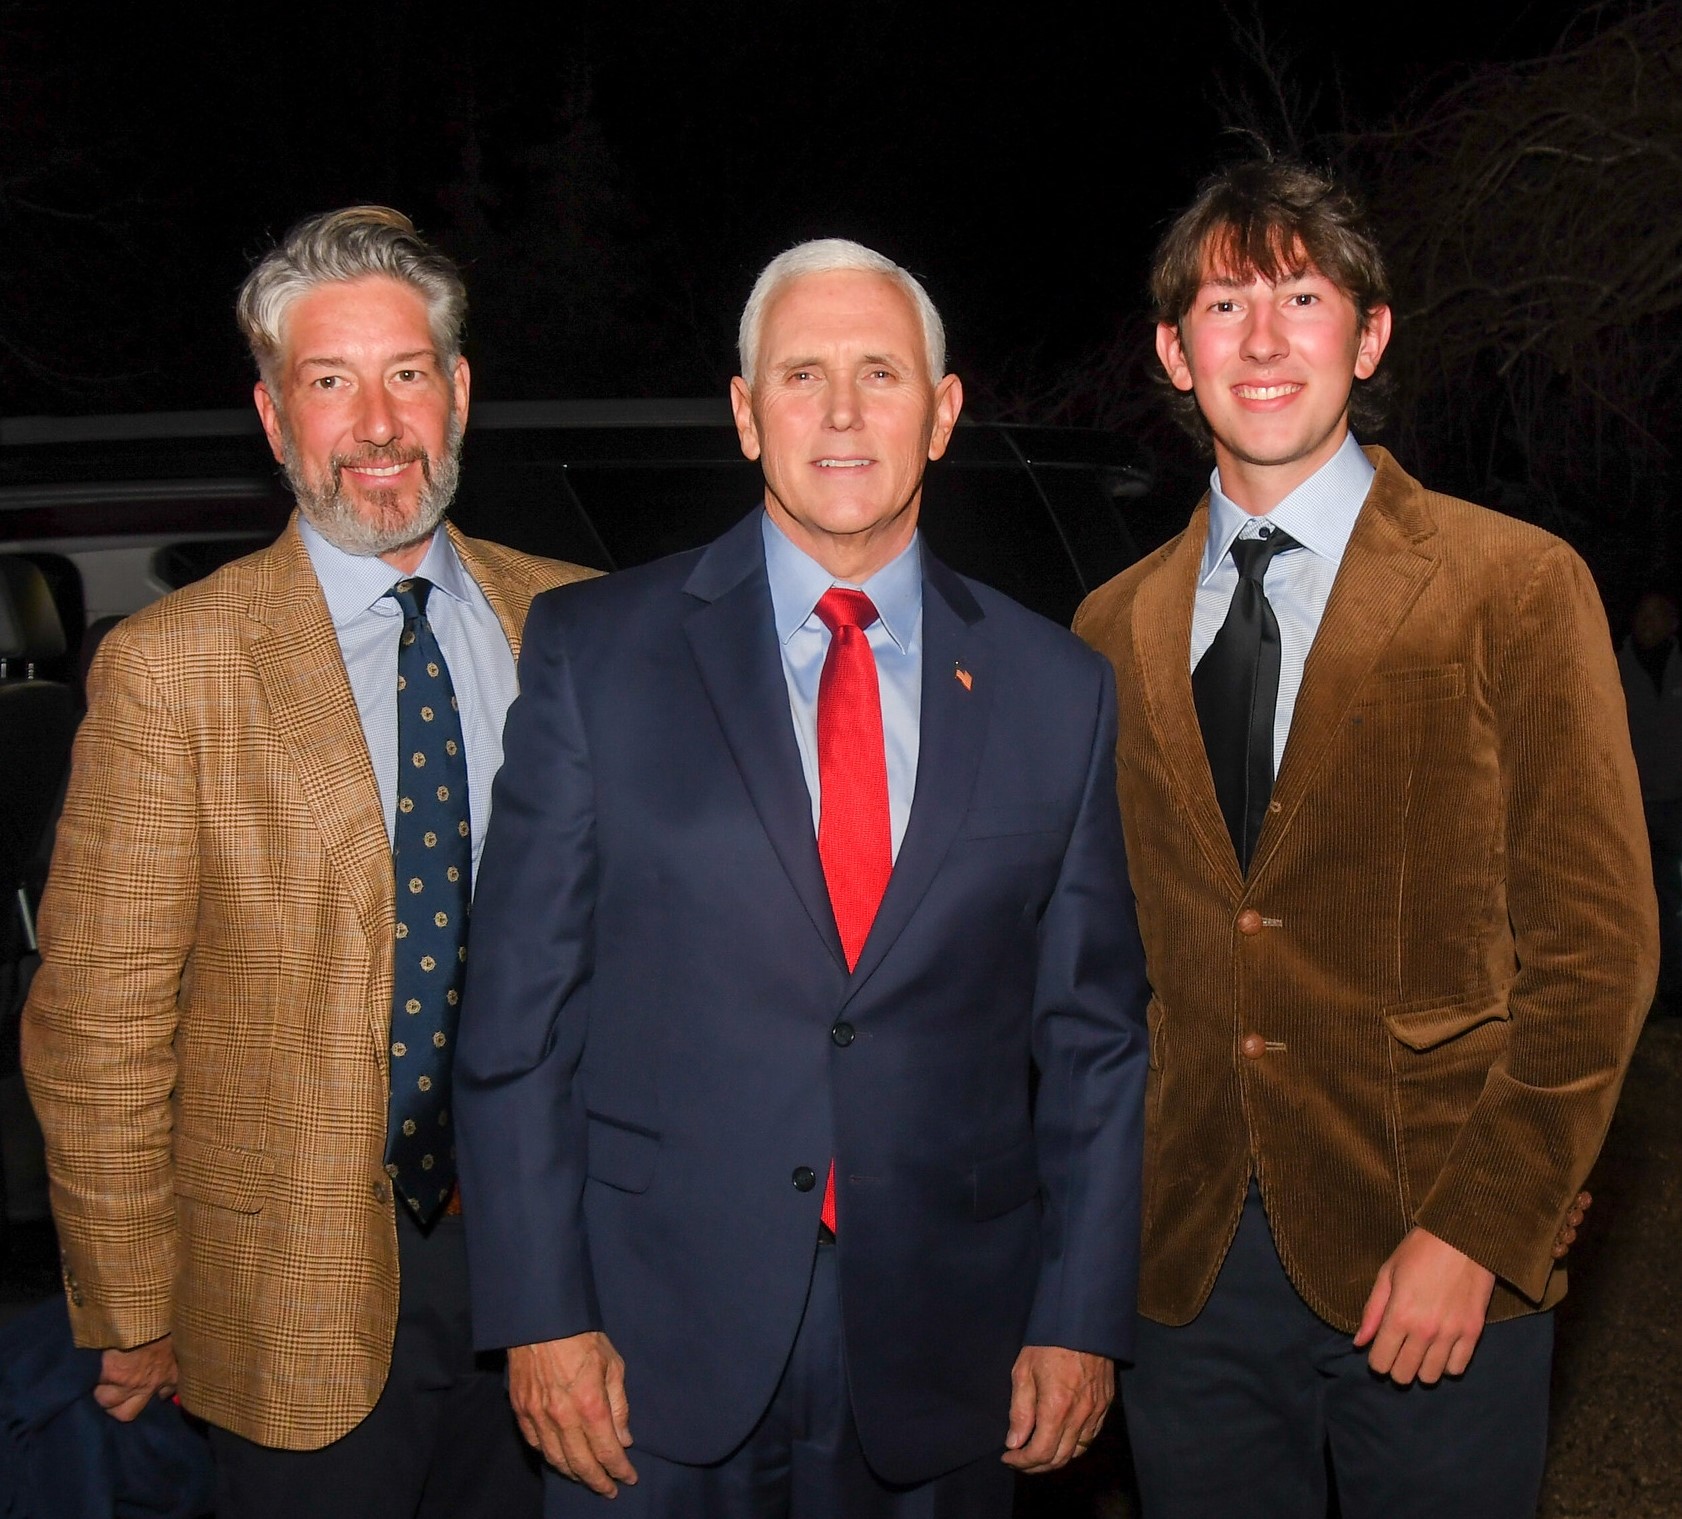 The Brudermans and Mike Pence